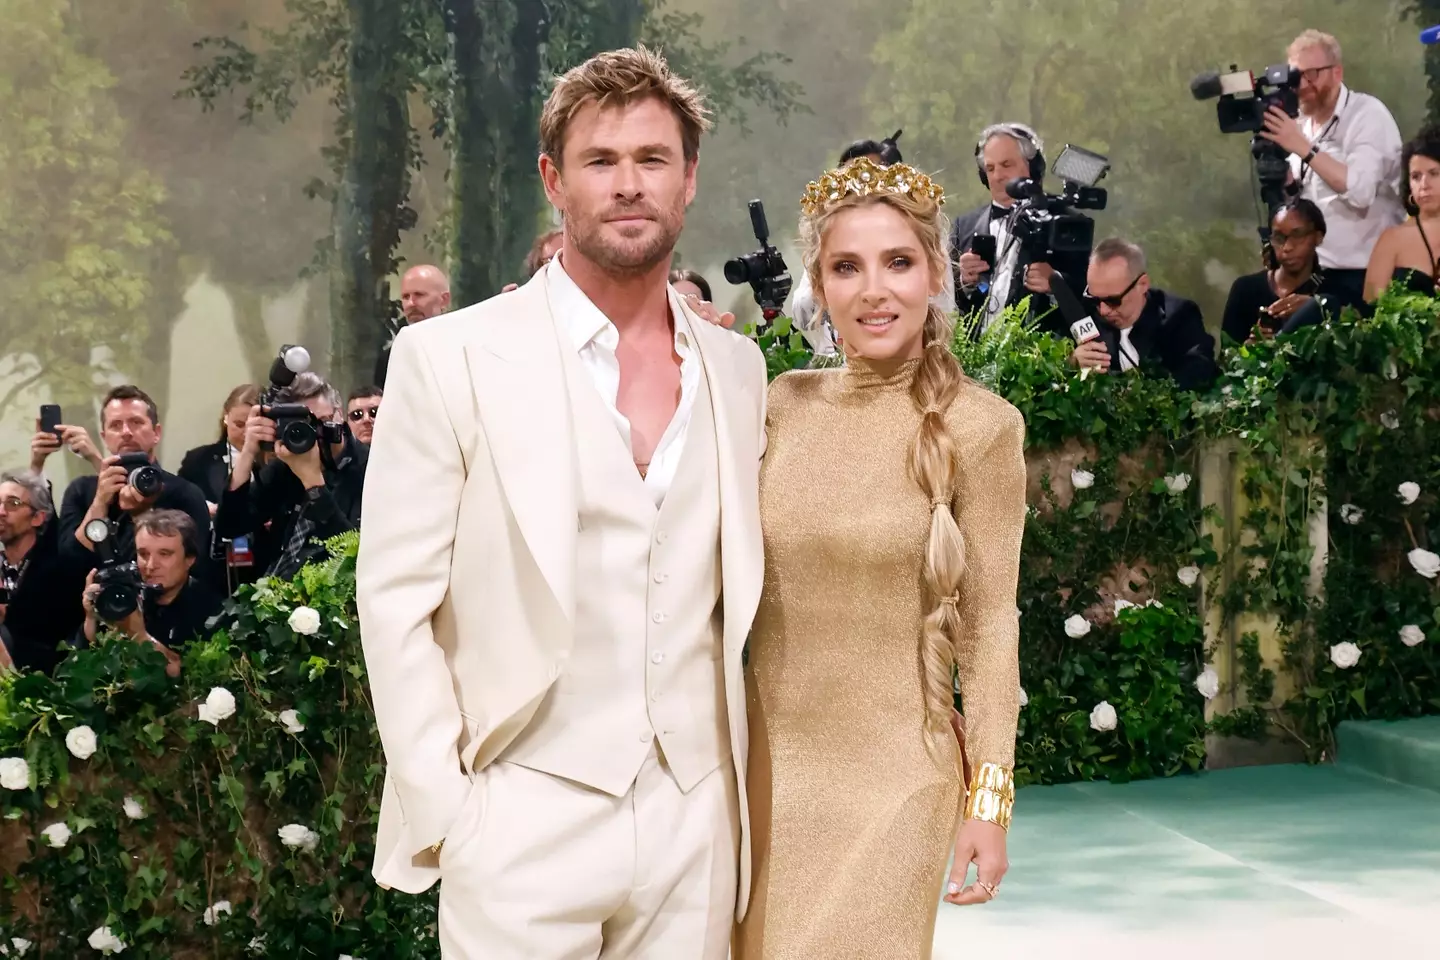 This year was Chris Hemsworth's first time at the Met Gala. (Taylor Hill/Getty Images) 